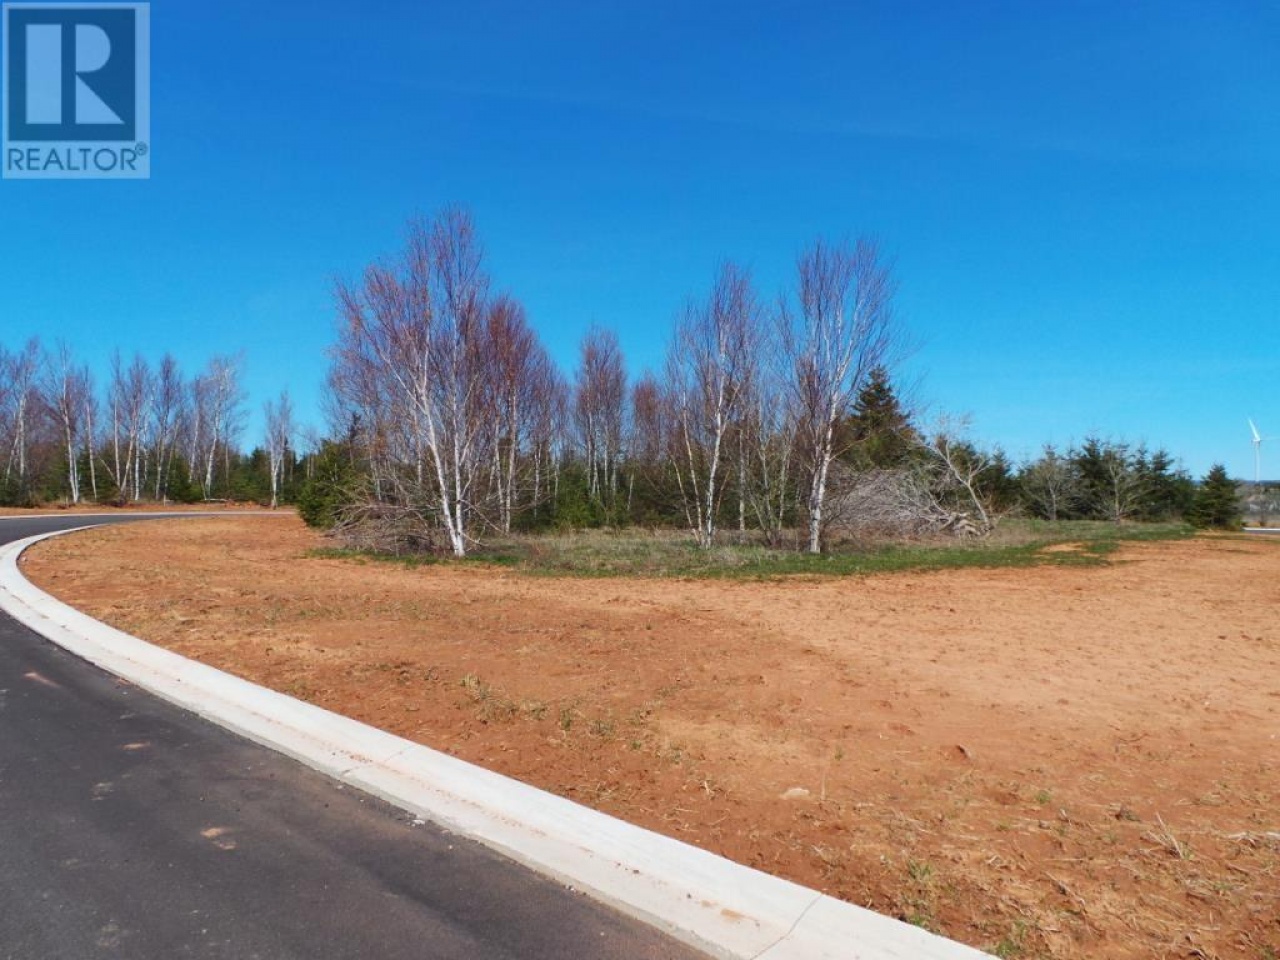 Lot 20-10 Waterview HeightsLot 20-10 Waterview Heights, Summerside, Prince Edward Island C1N6H5, ,Vacant Land,For Sale,Lot 20-10 Waterview Heights,202111415